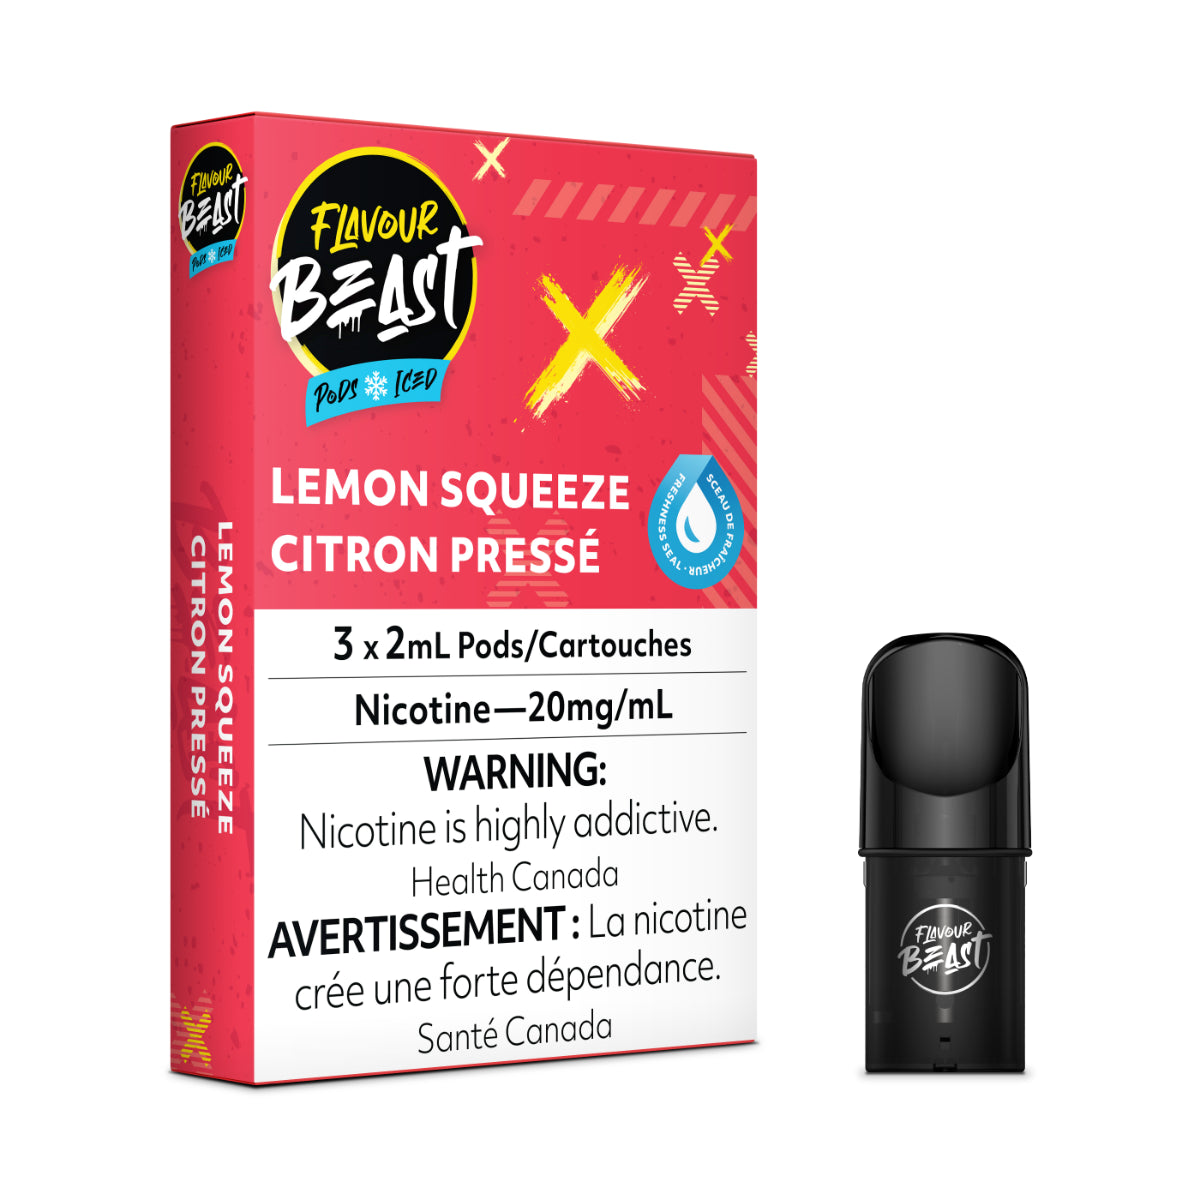 Lemon Squeeze - Flavour Beast Pod Pack - 20mg - EXCISED